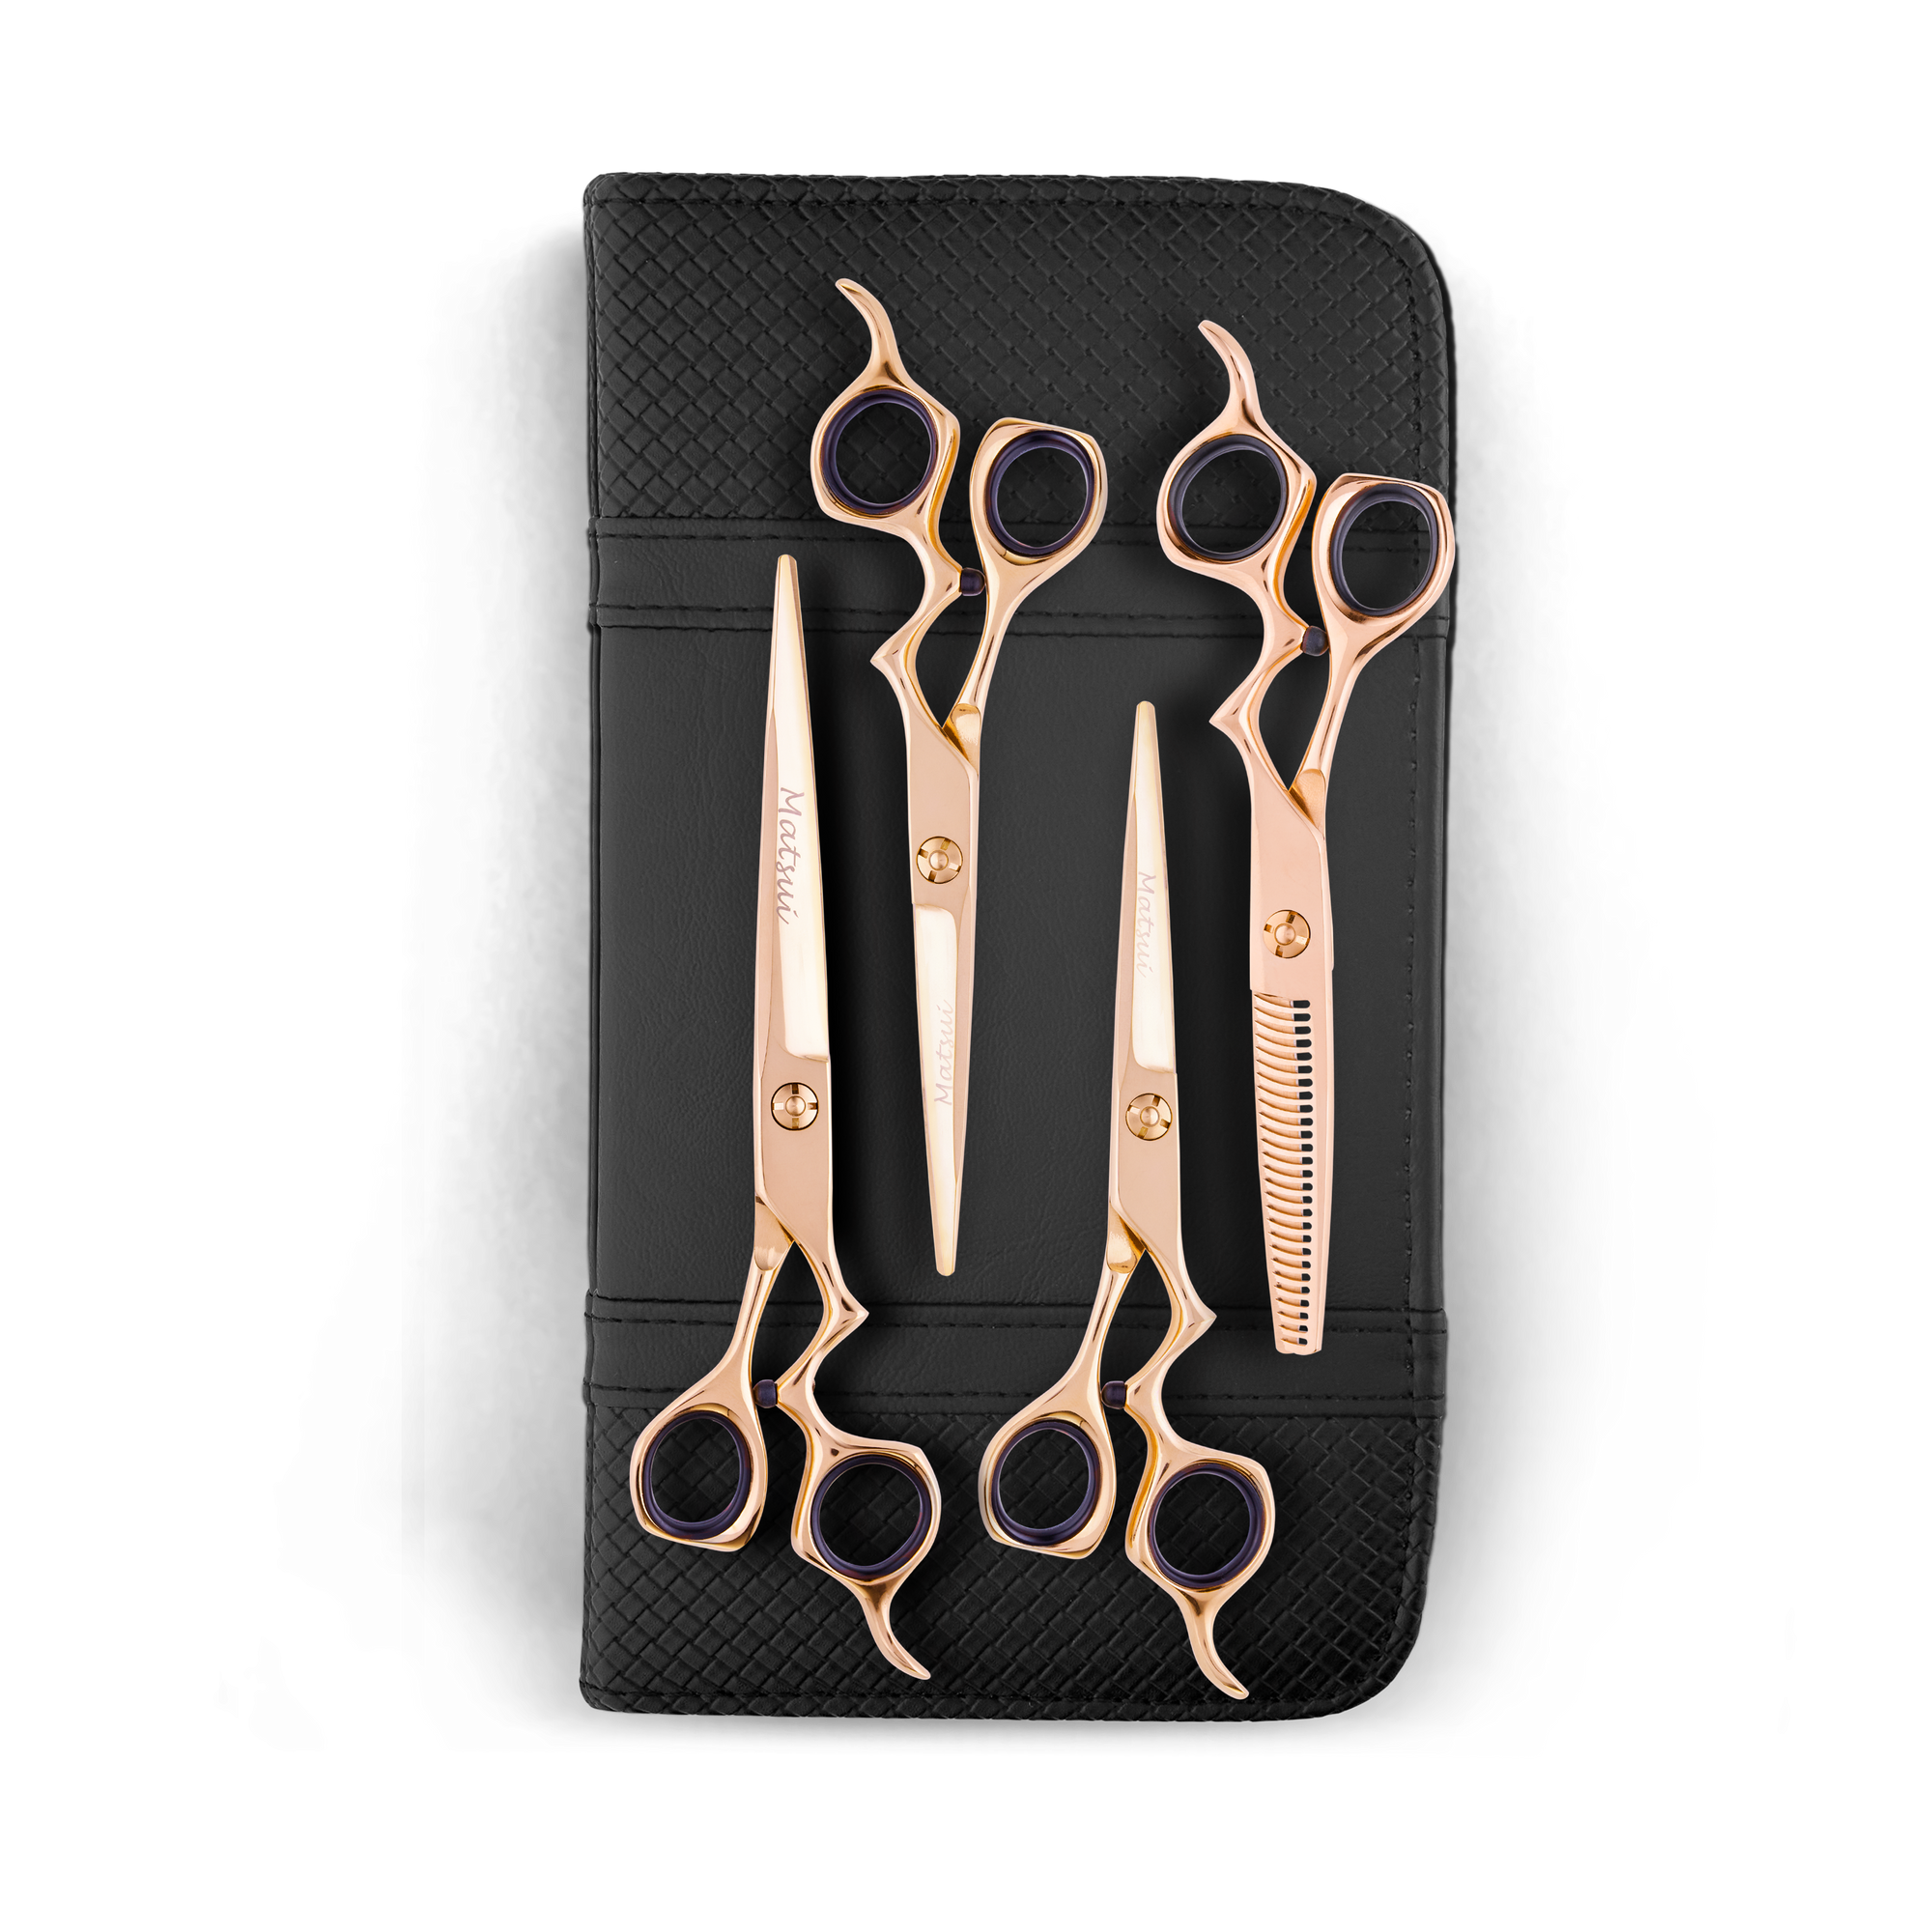 Matsui Classic Ergo Support Ultimate Barber Combo Rose Gold (4set) (6552444436541)